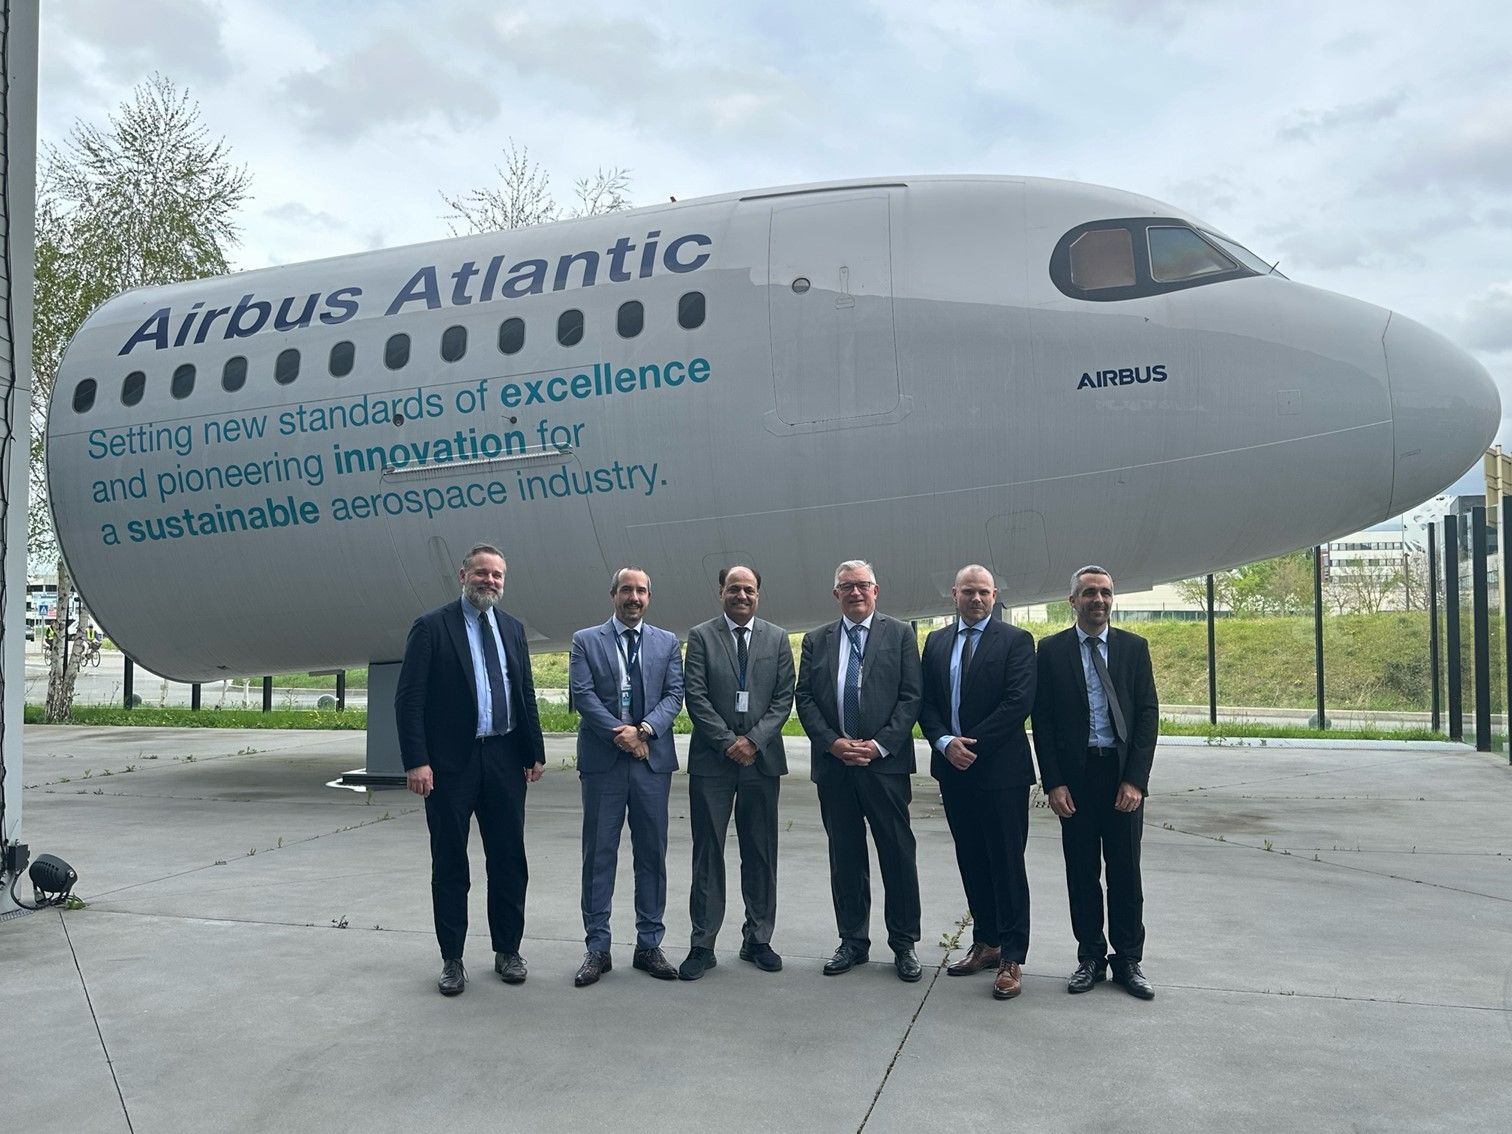 Indian Mahindra Aerostructures  and  Airbus Atlantic  have  signed a multi-year contract  for  the  production of  aircraft  components  including  A320 family parts.